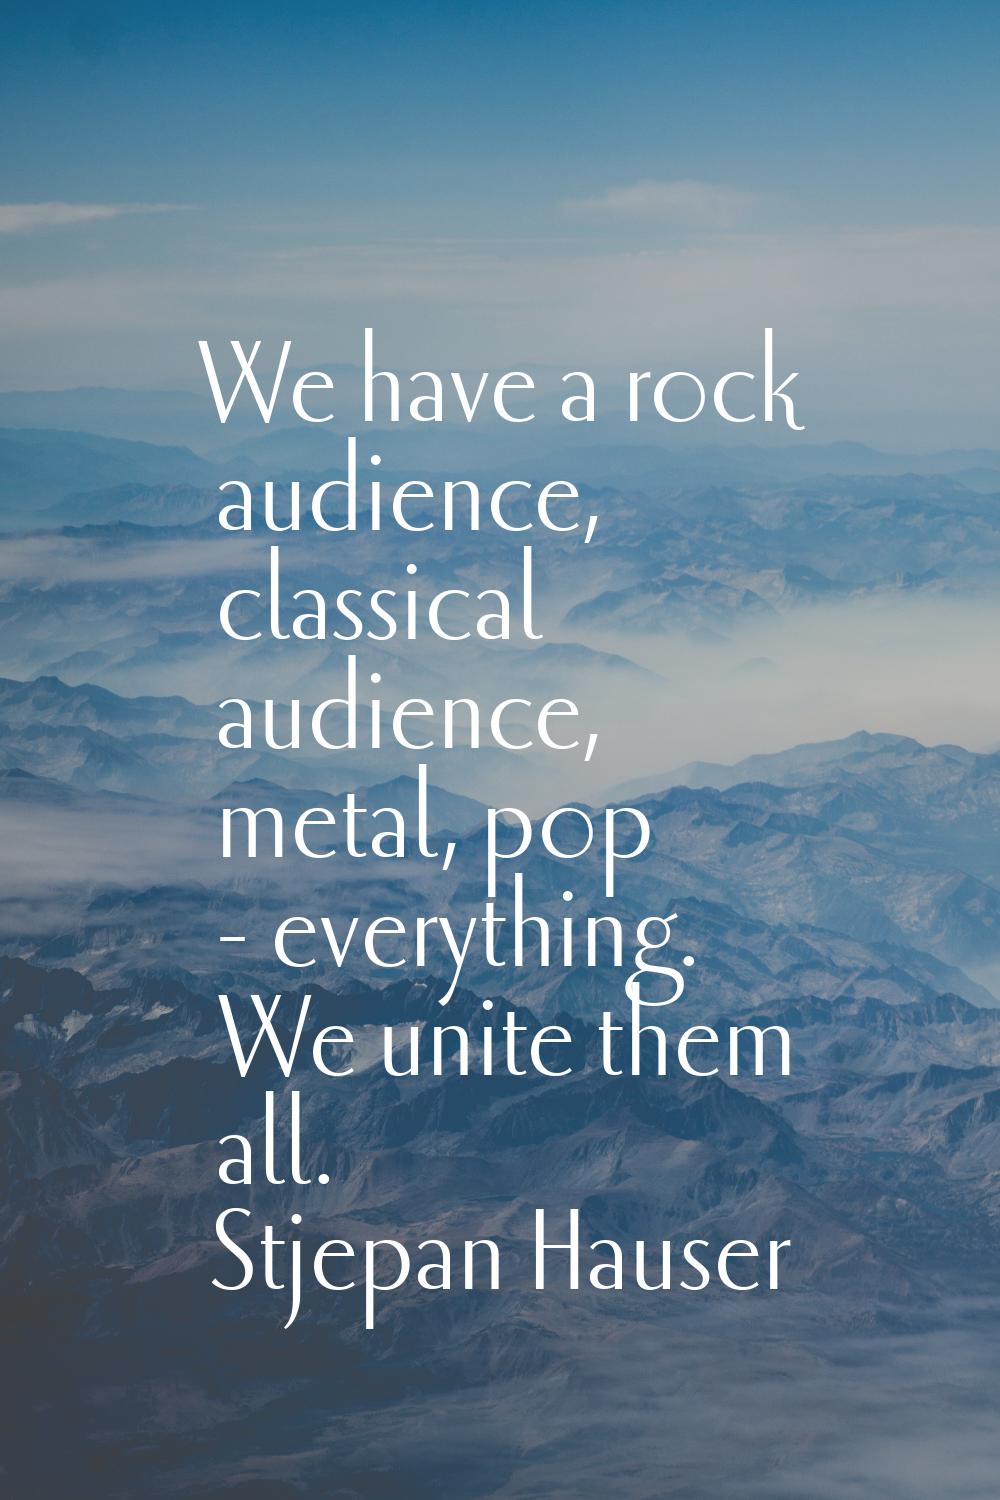 We have a rock audience, classical audience, metal, pop - everything. We unite them all.